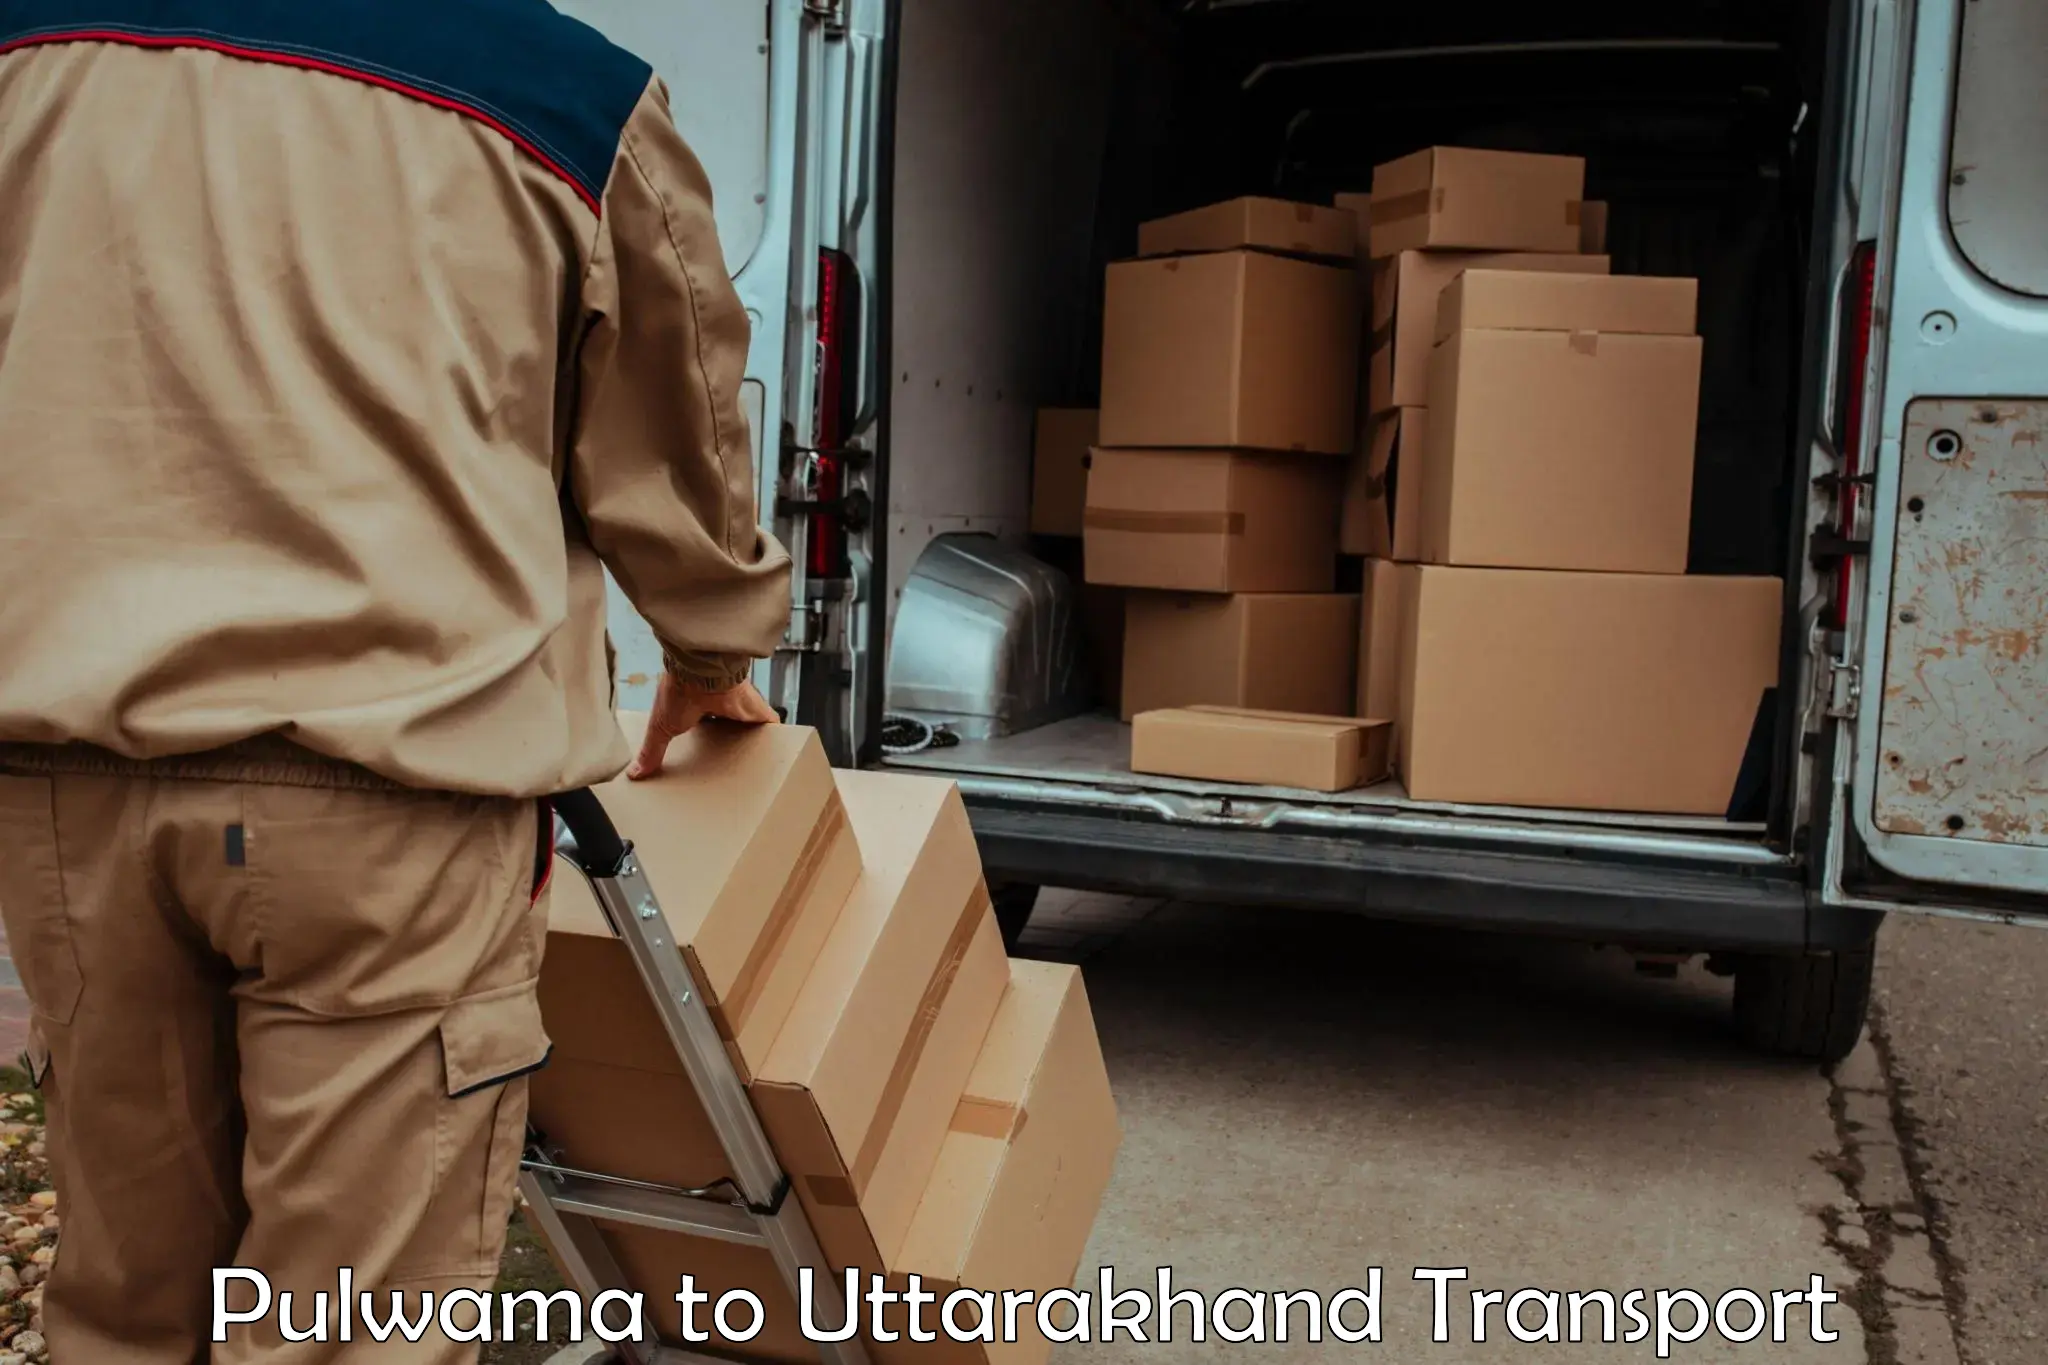 Pick up transport service Pulwama to IIT Roorkee